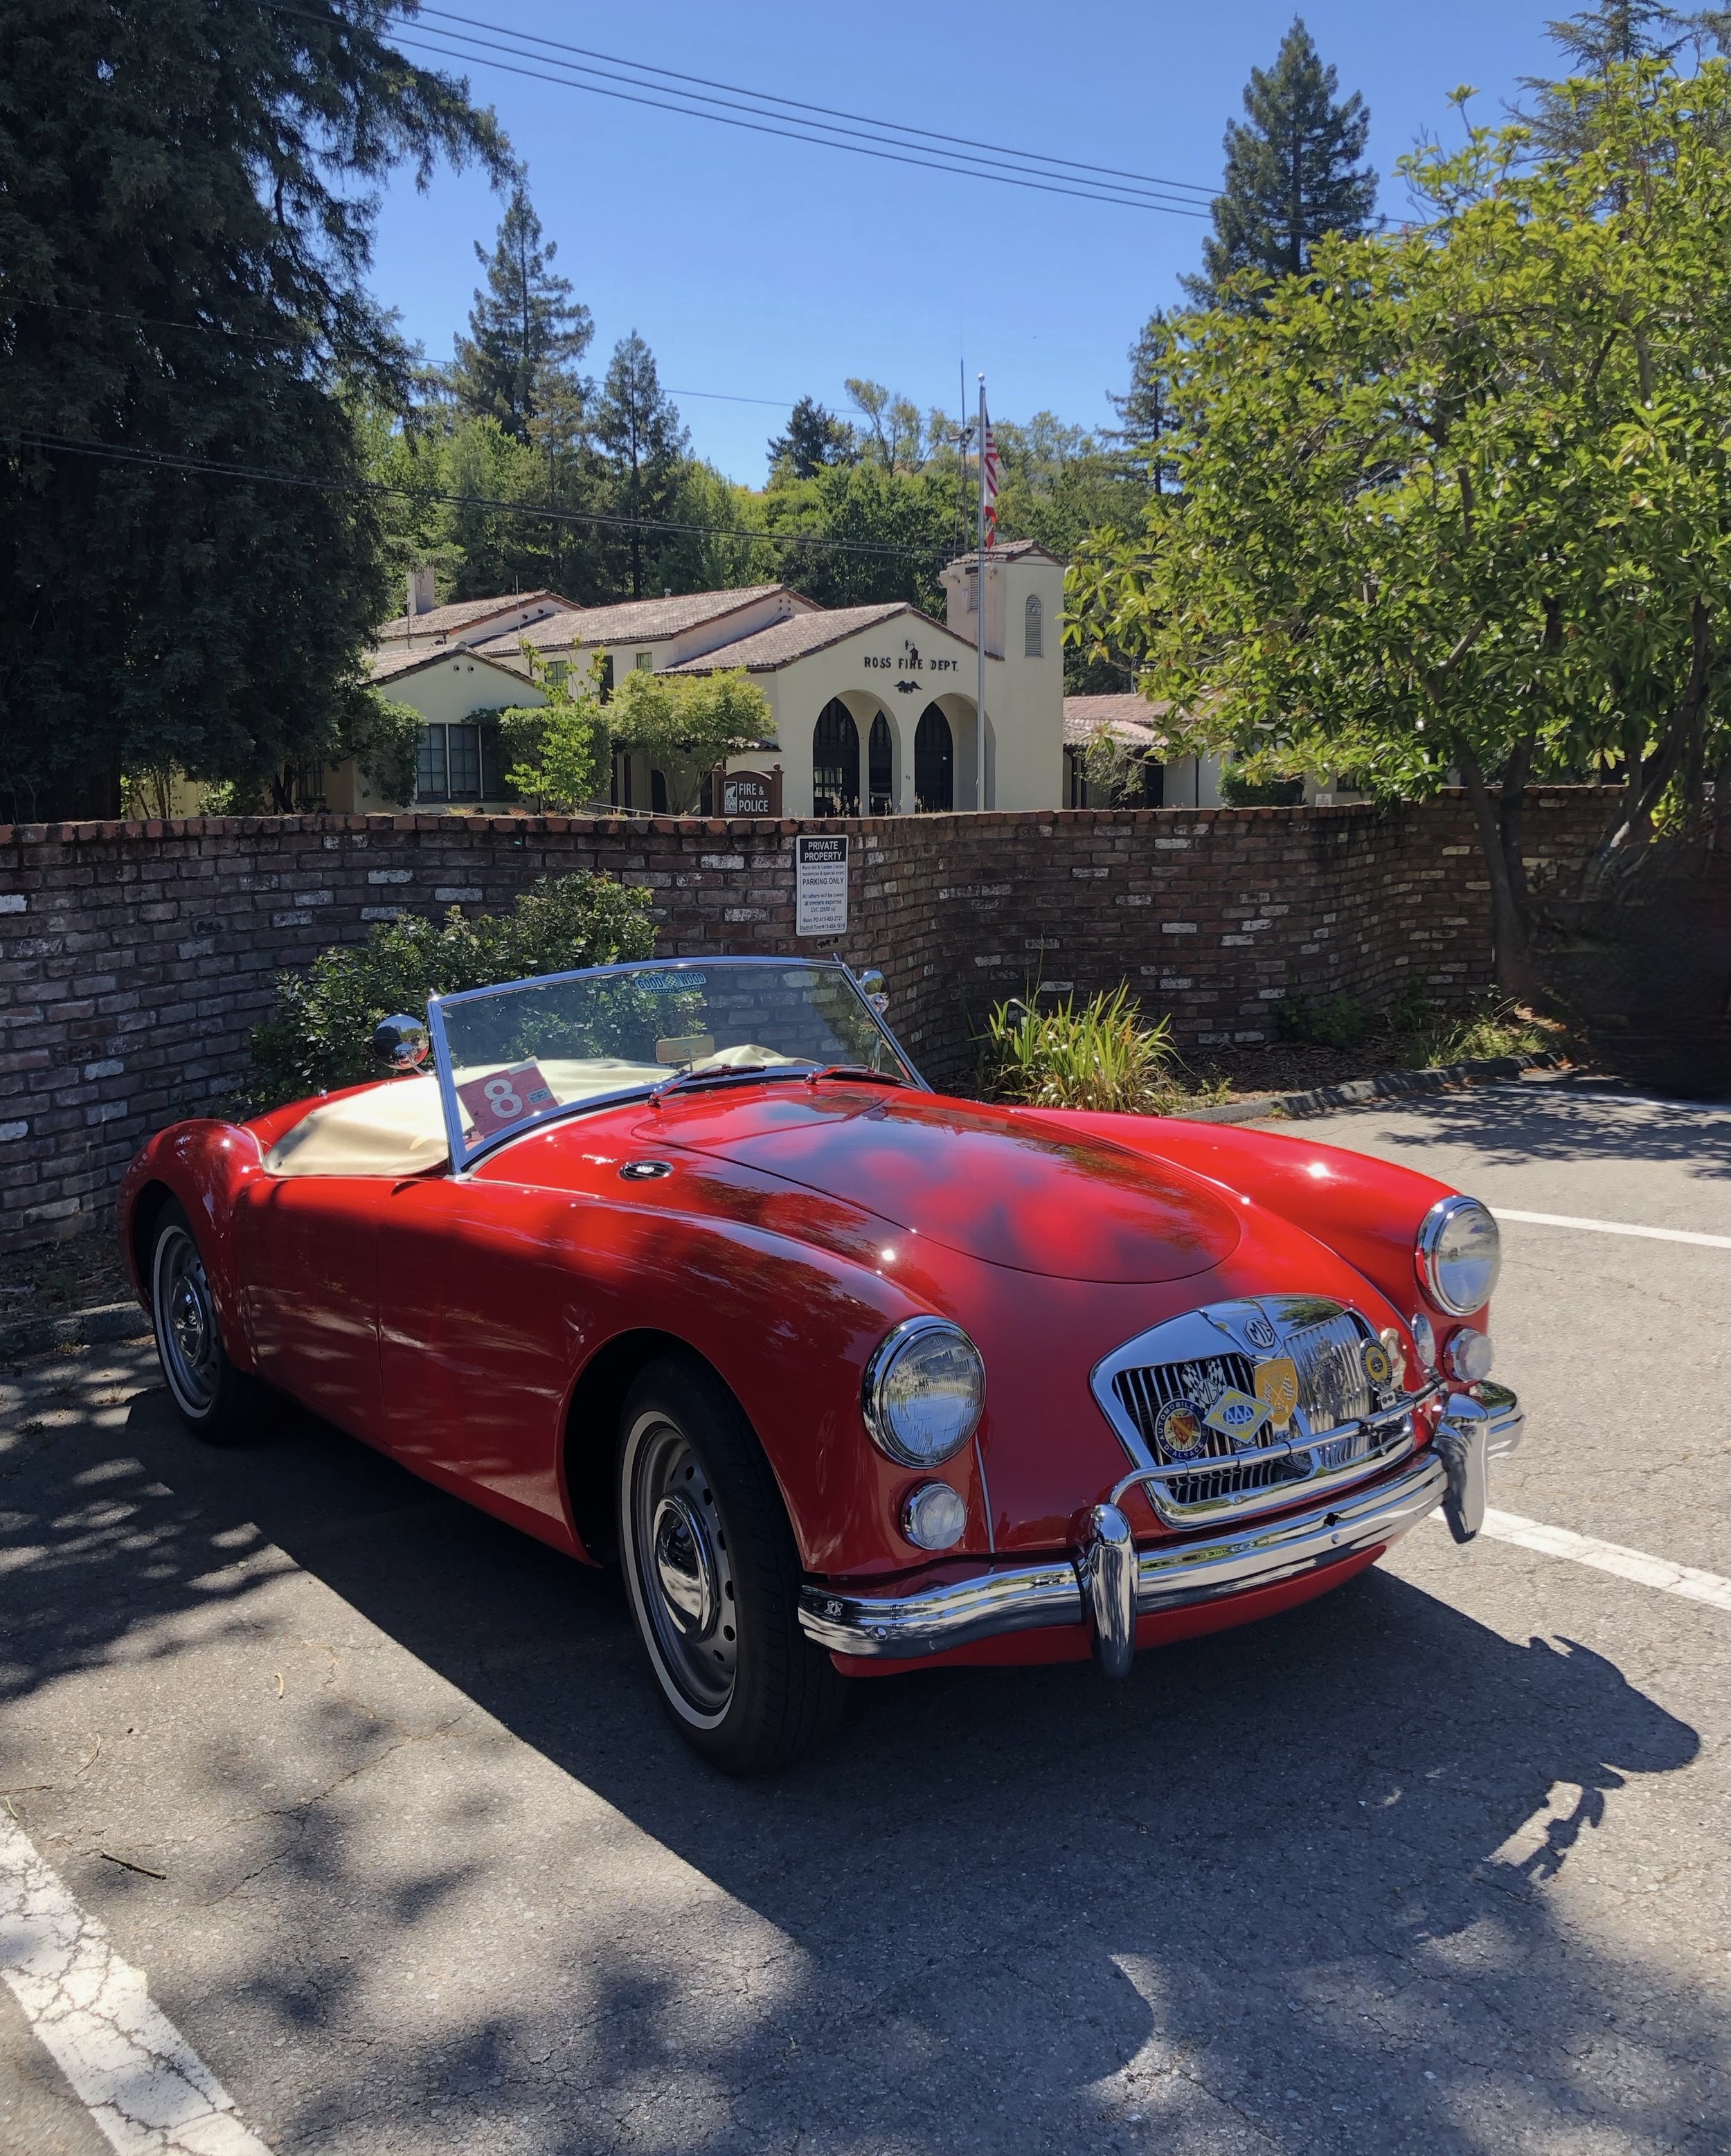  1962 MGA 1600 MK II. It was one of the last MGAs built before the MGB appeared in 1954. A little over 3,000 of this model MGA were manufactured.  In 2012-2013 this auto underwent a loving &amp; painstakingly detailed  restoration by Gary in LeClaire